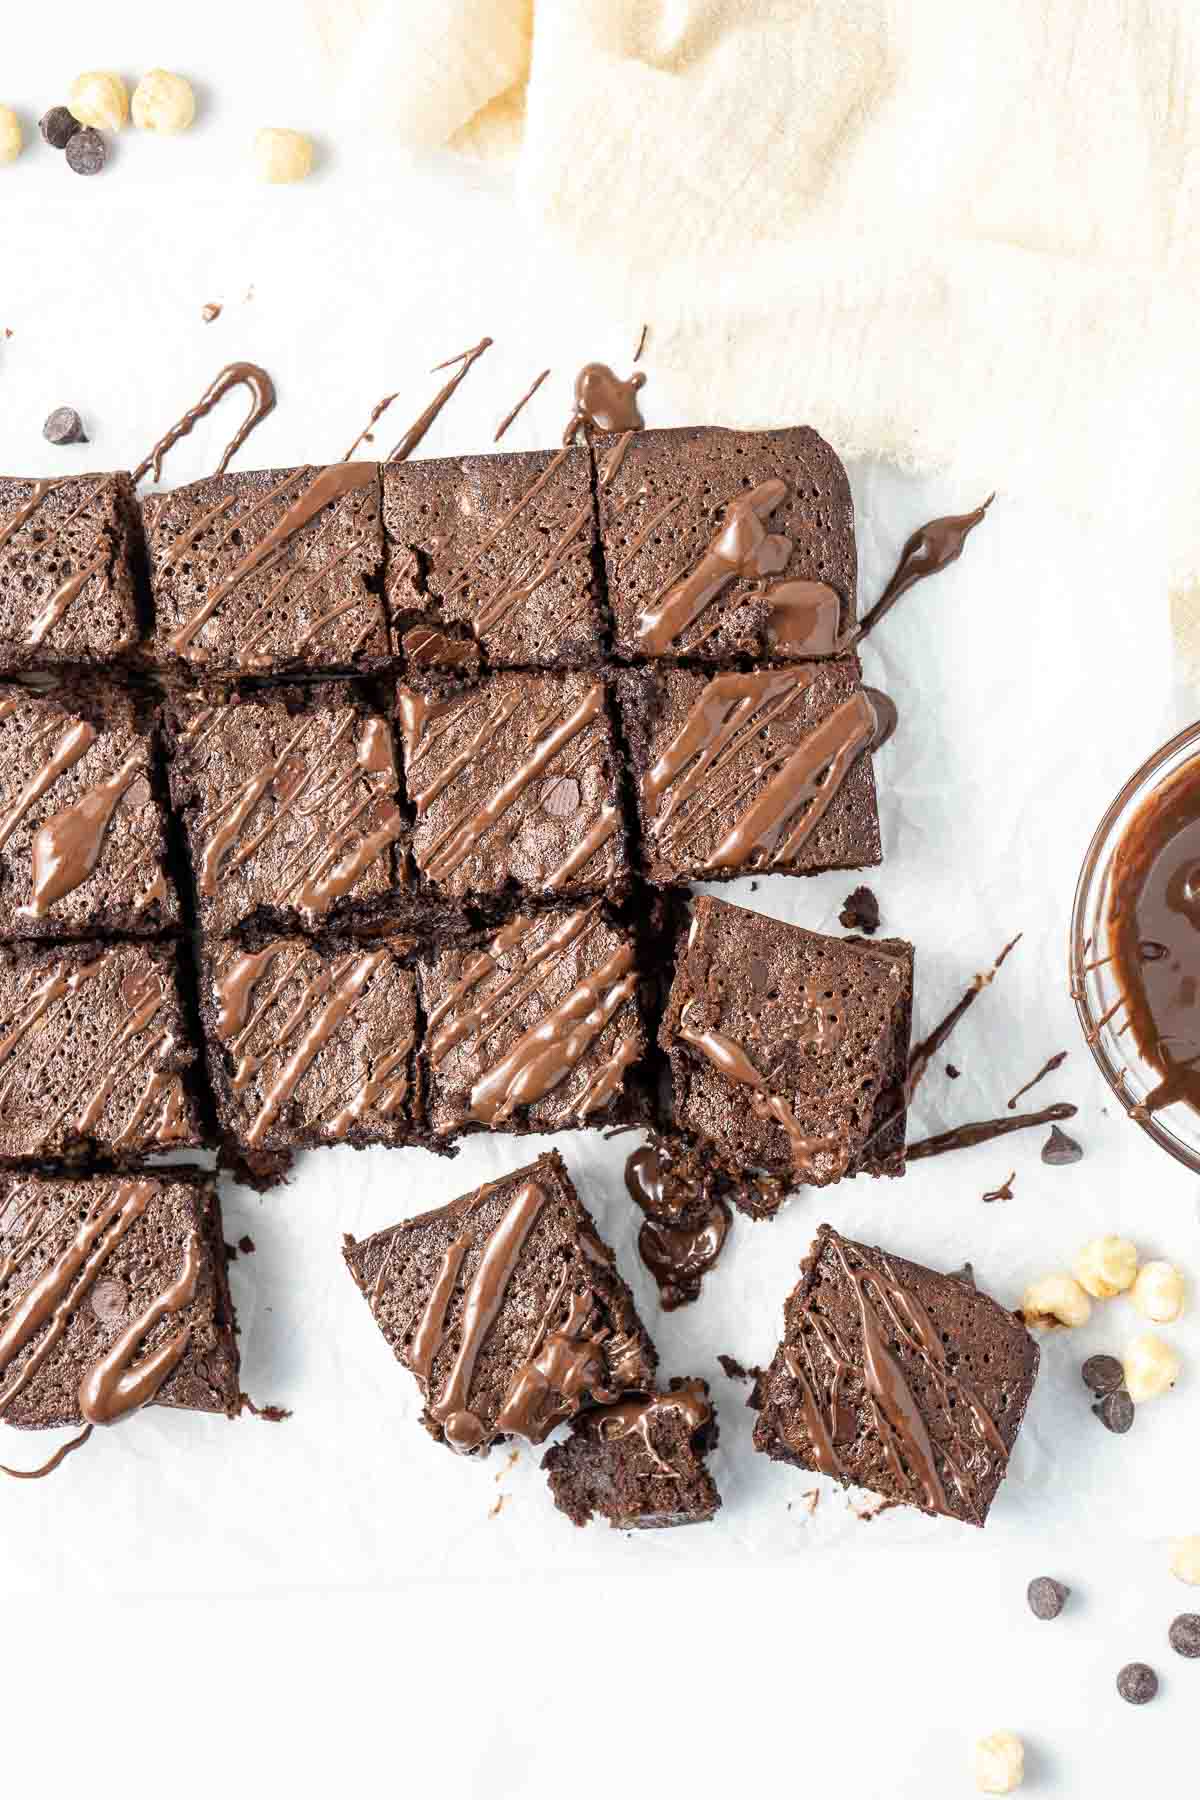 Chocolate brownies sliced into squares from above.